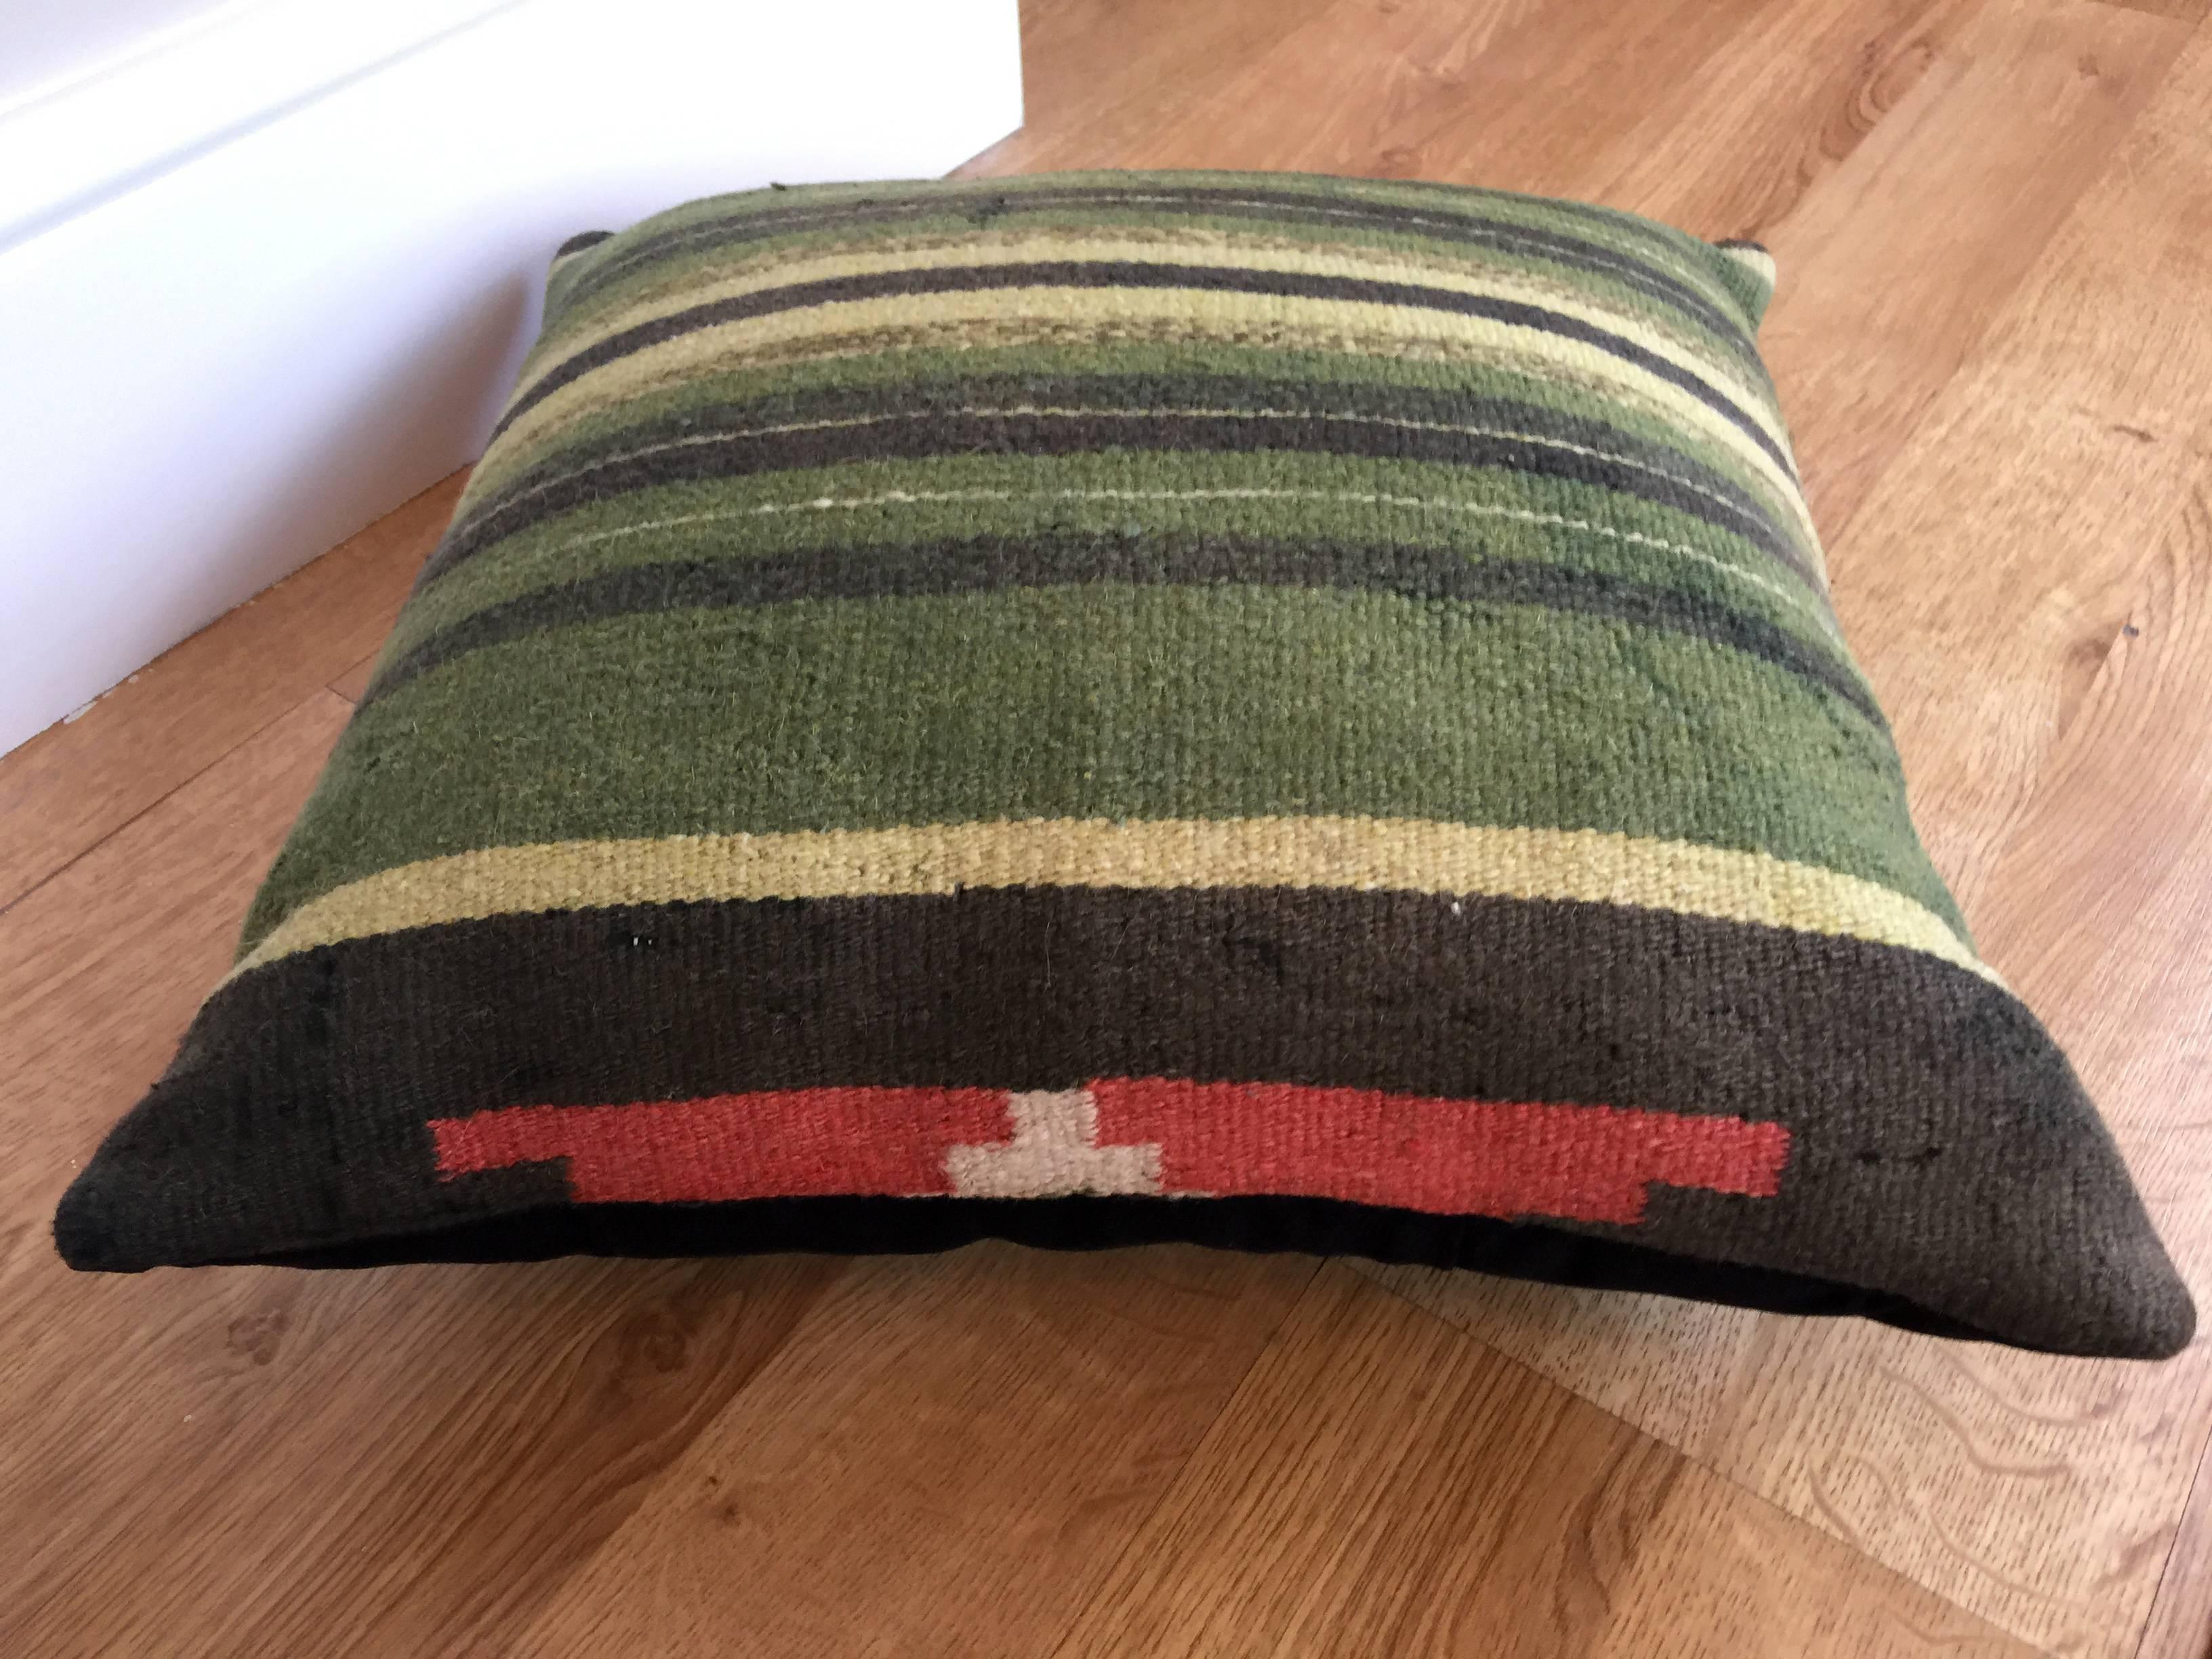 Antique vintage cushion handmade Turkish Kilim pillow cover, view one of the most comprehensive collections of decorative pillows, handmade traditional Kilim rugs, Kilim cushions covers and Kilim Furniture, with worldwide delivery. Our Gallery based